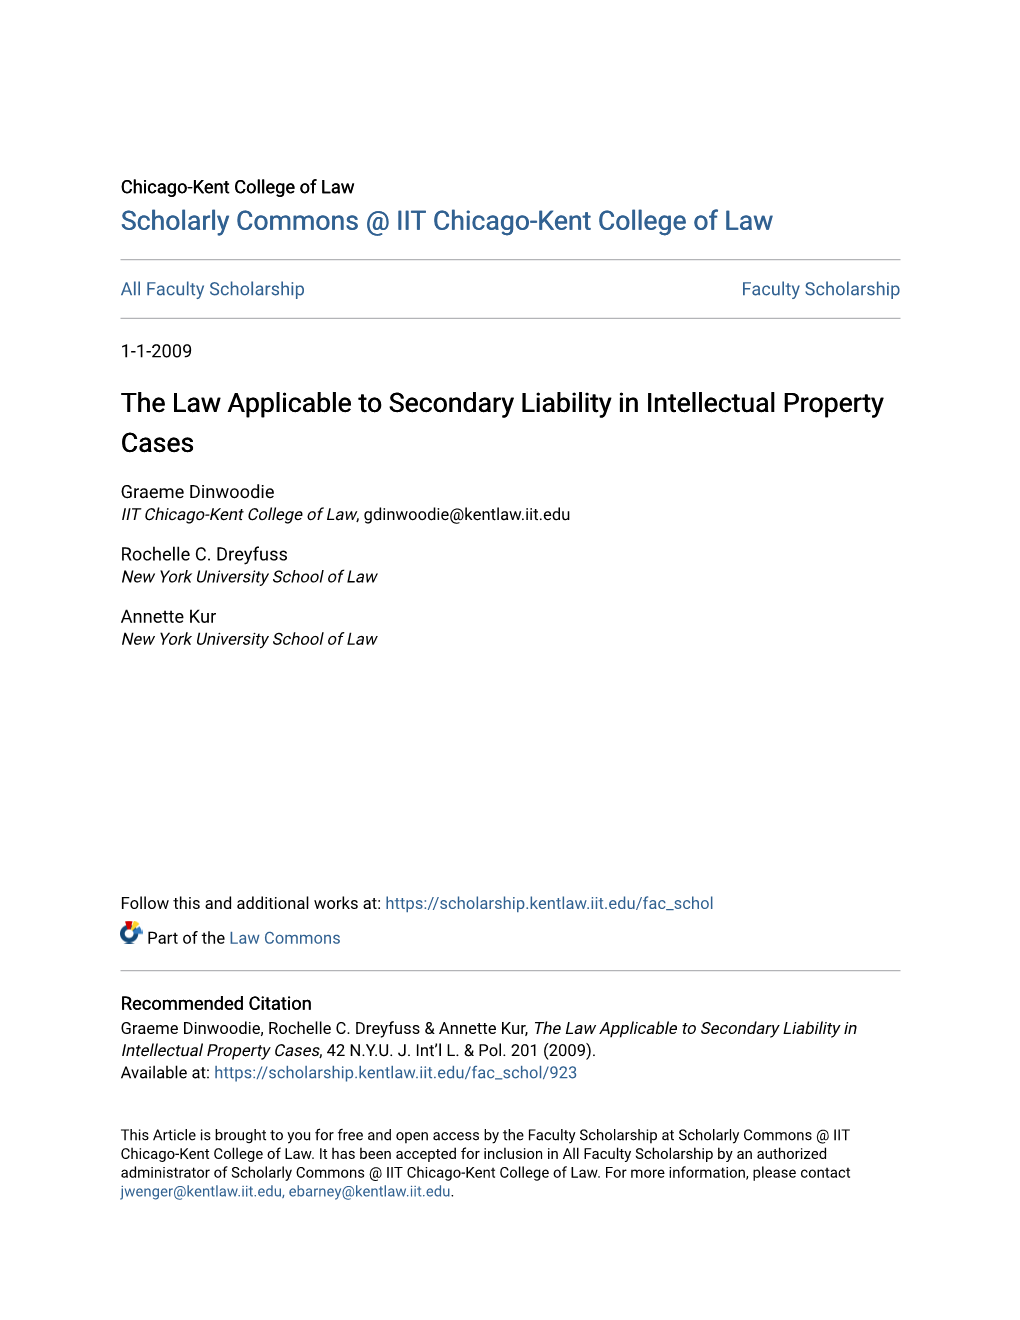 The Law Applicable to Secondary Liability in Intellectual Property Cases